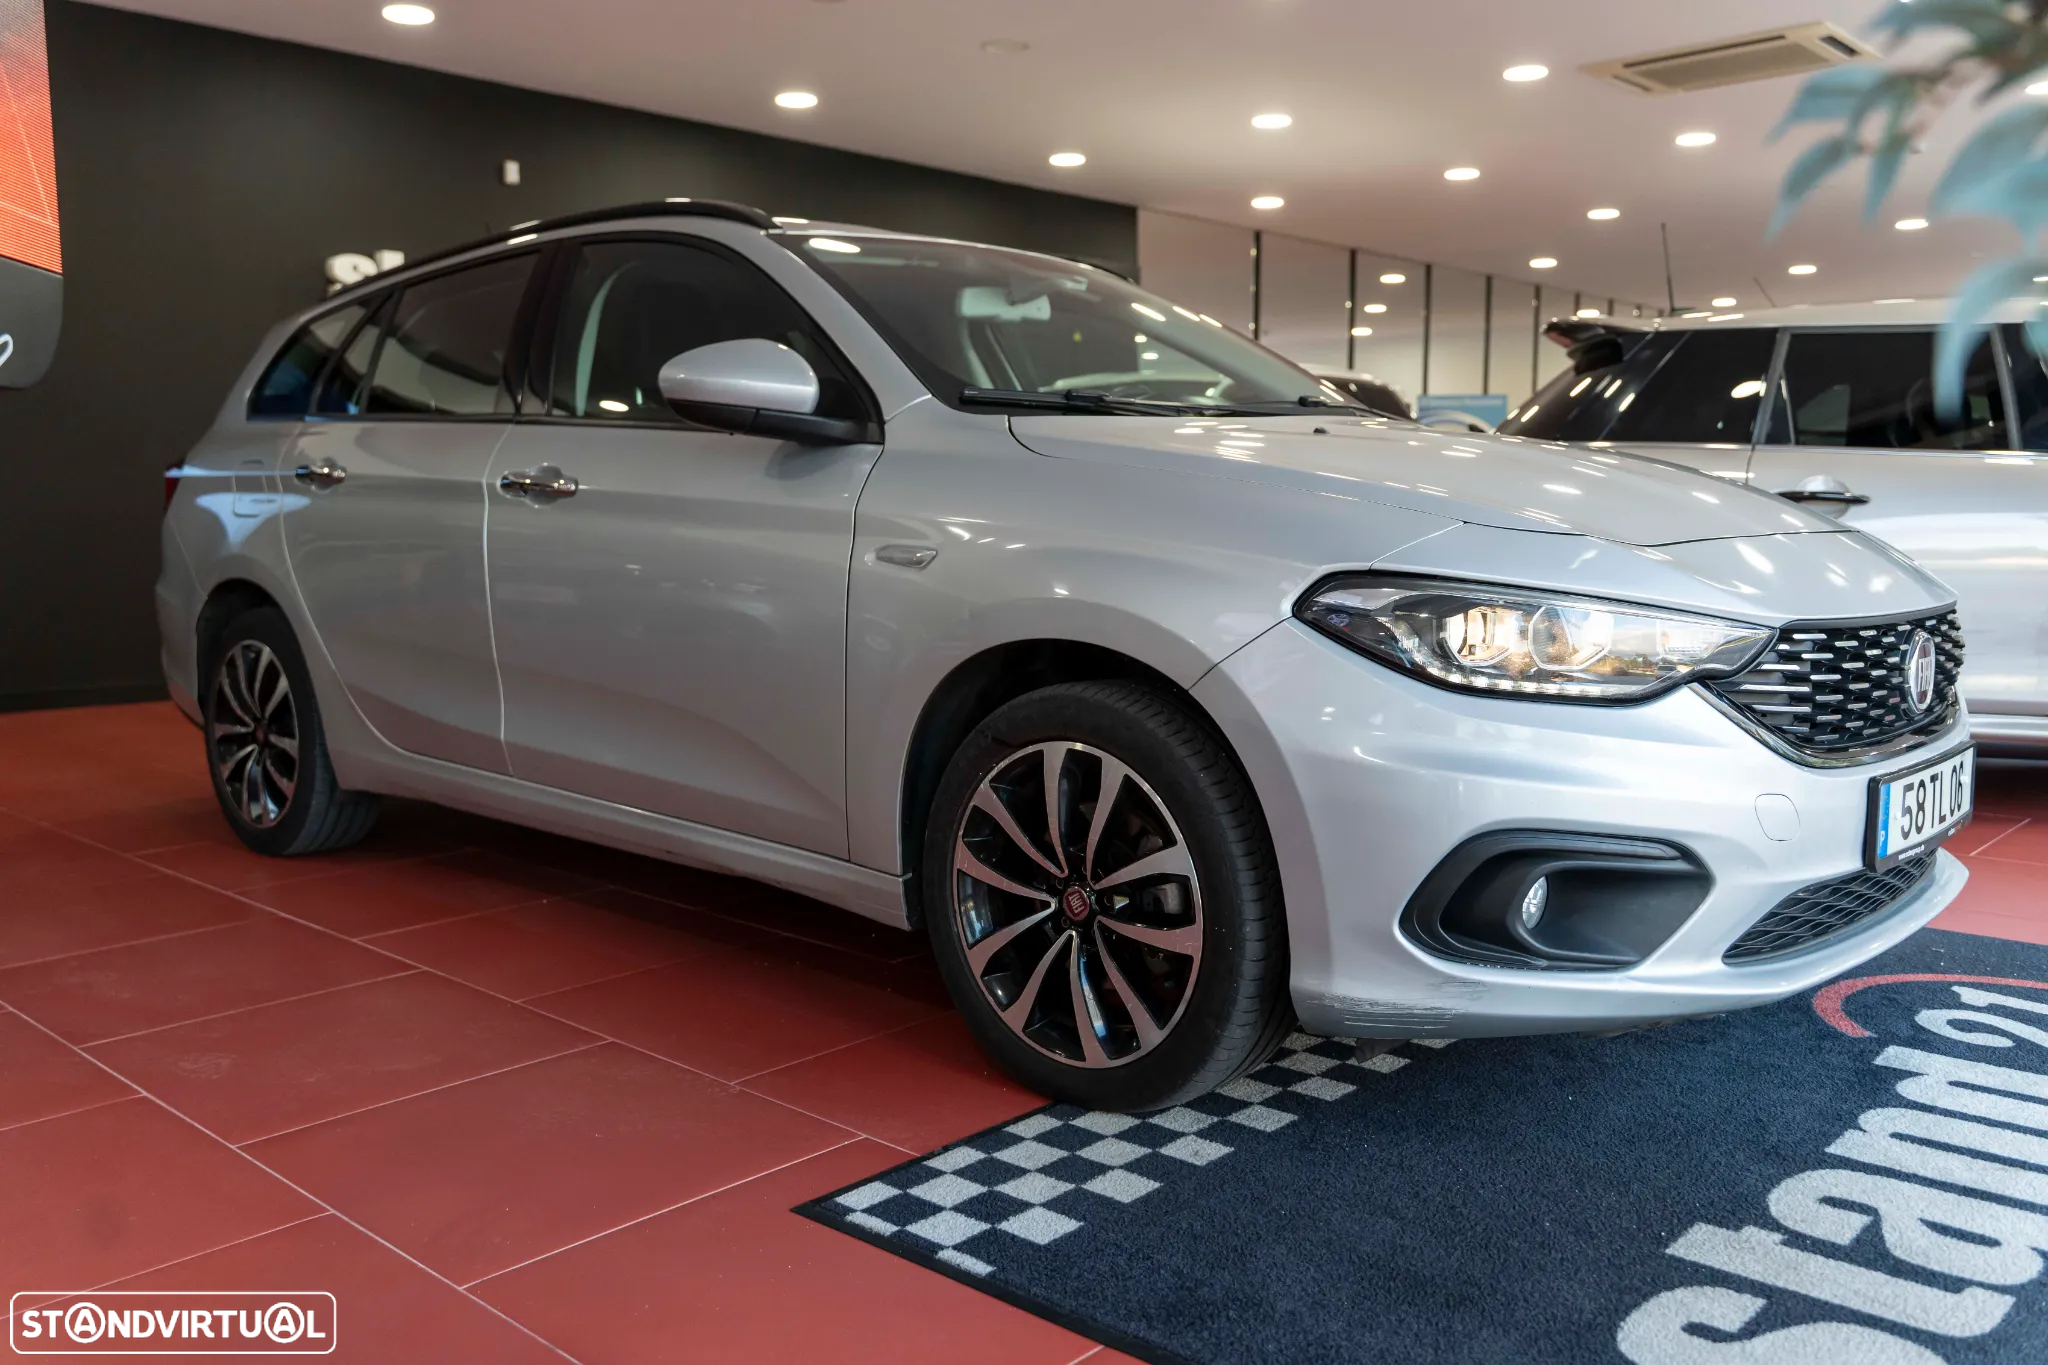 Fiat Tipo Station Wagon 1.6 M-Jet Lounge DCT - 4